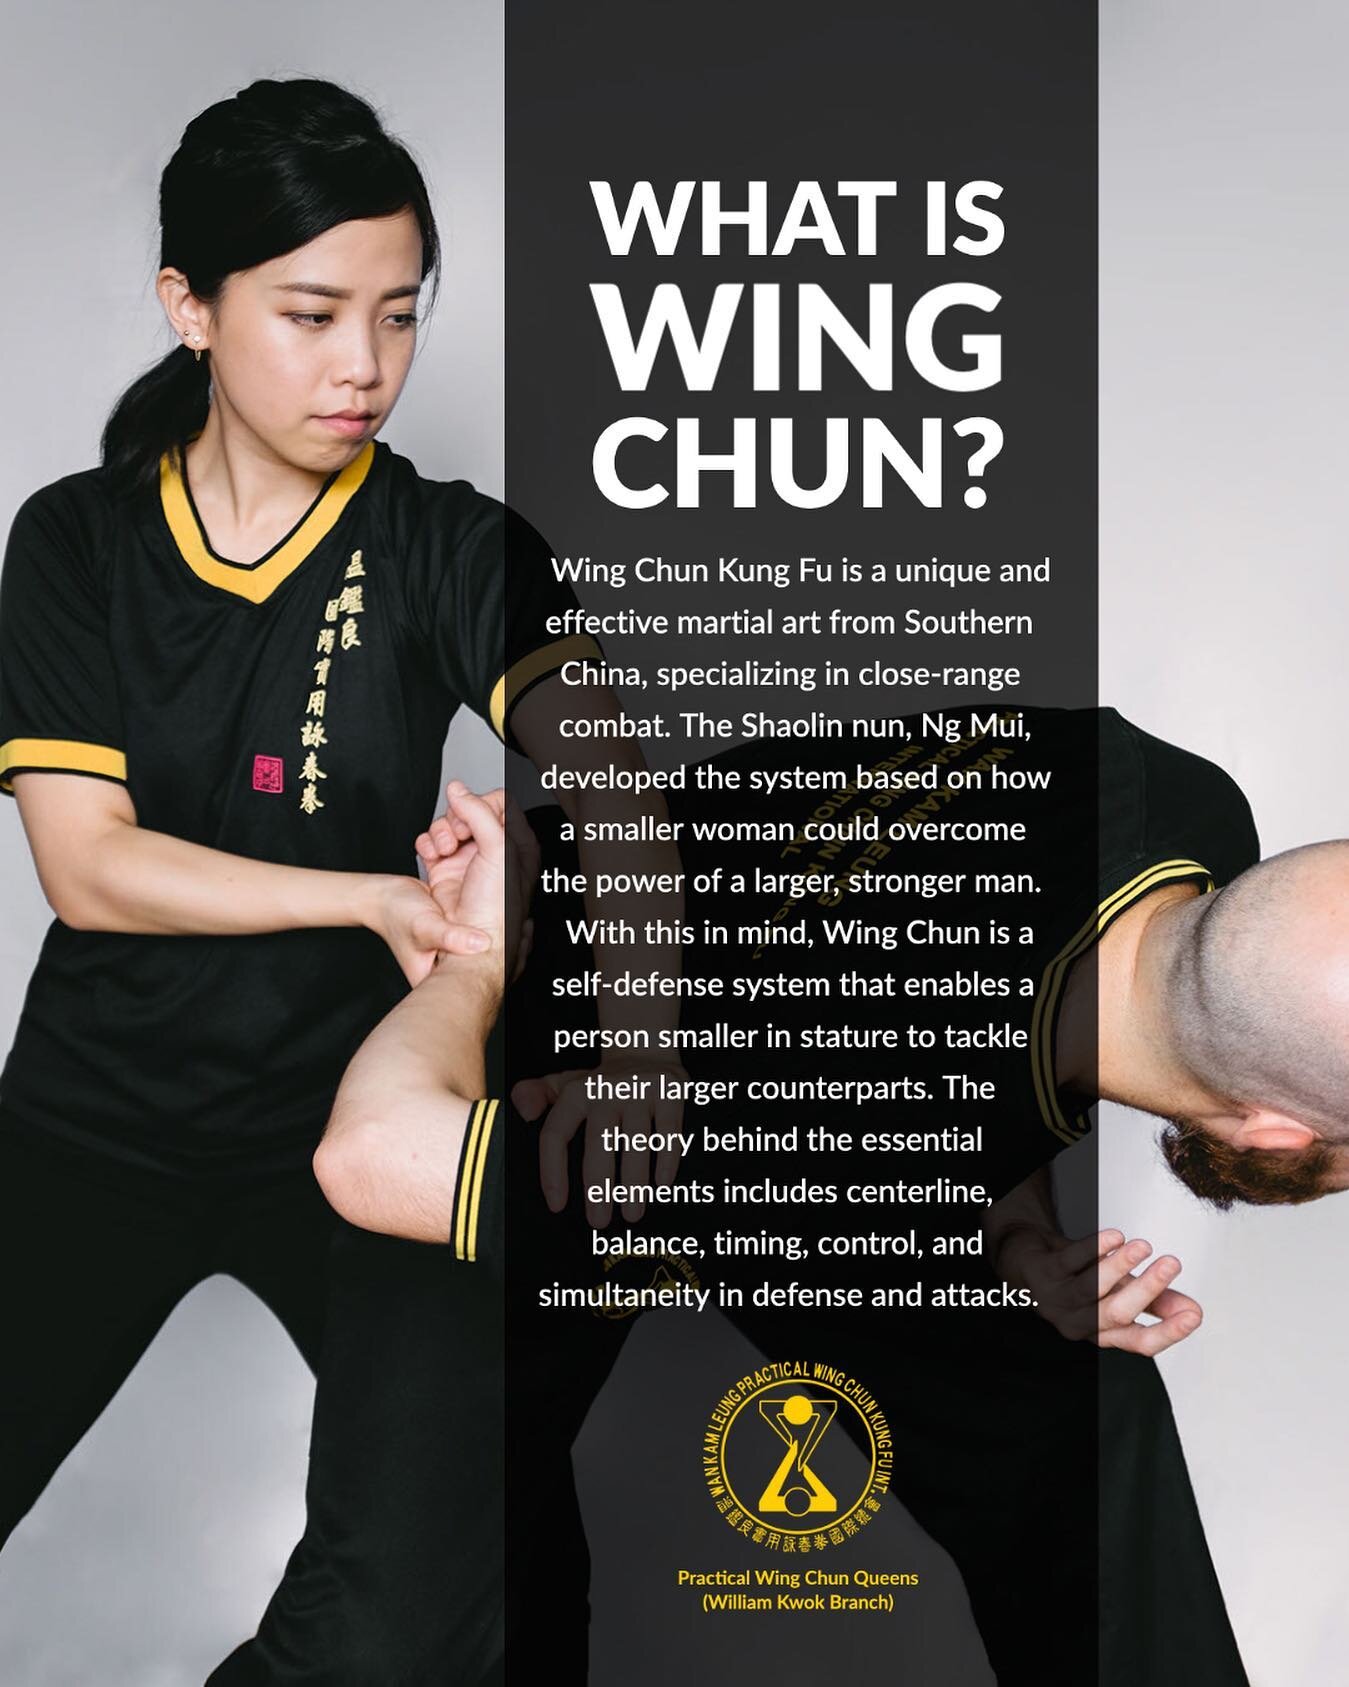 Wing Chun is for everyone. Instead of relying on muscle power, it utilizes body structure to maximize our ability to defend ourselves, enabling a person smaller in stature to overcome their larger counterparts. 

Schedule a trial class with us to see